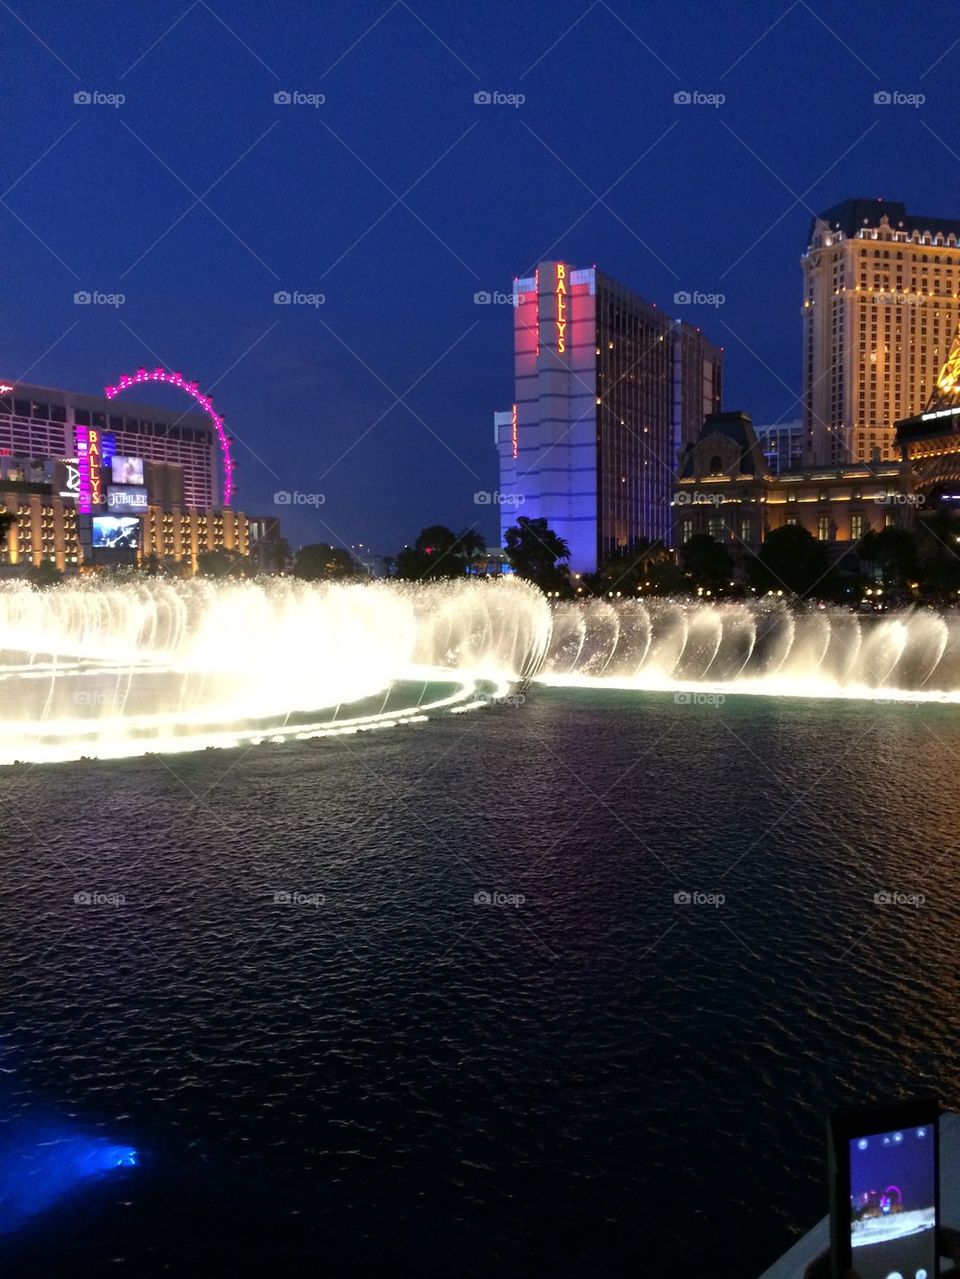 Water Show at the Bellagio